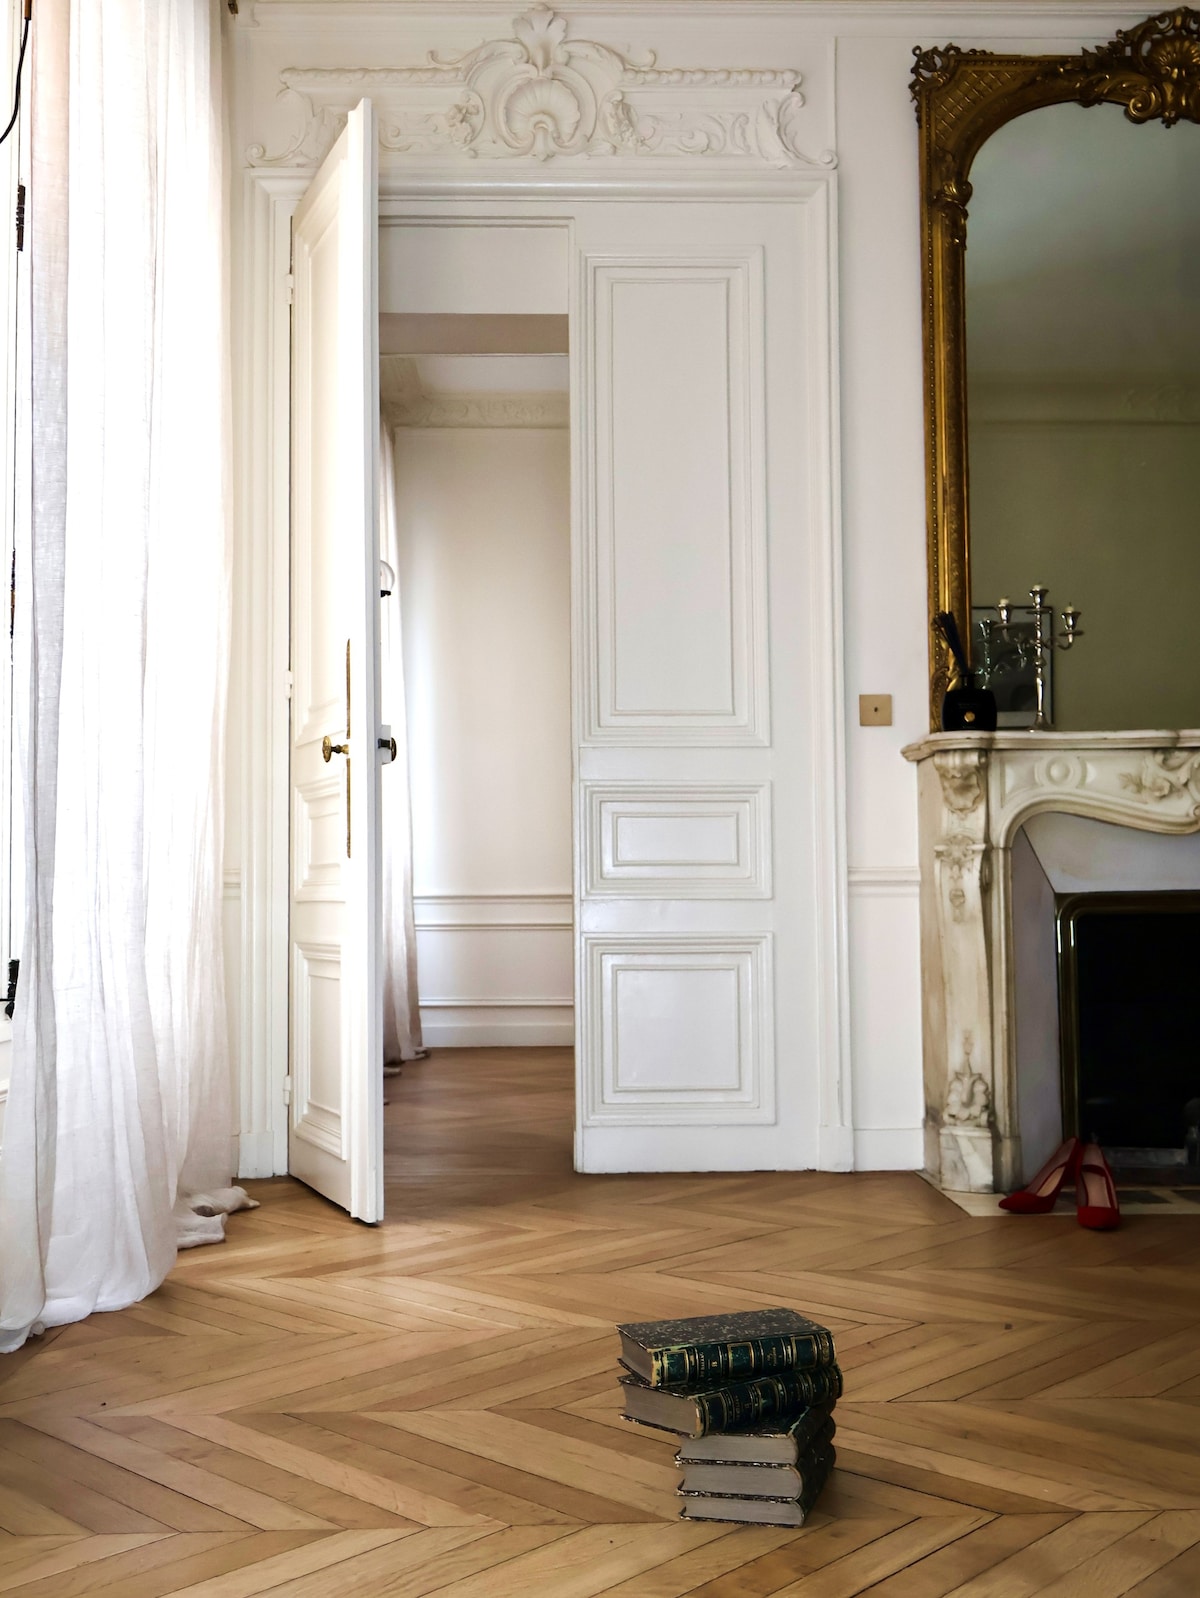 Luxury The charm of the typical Parisian apartment